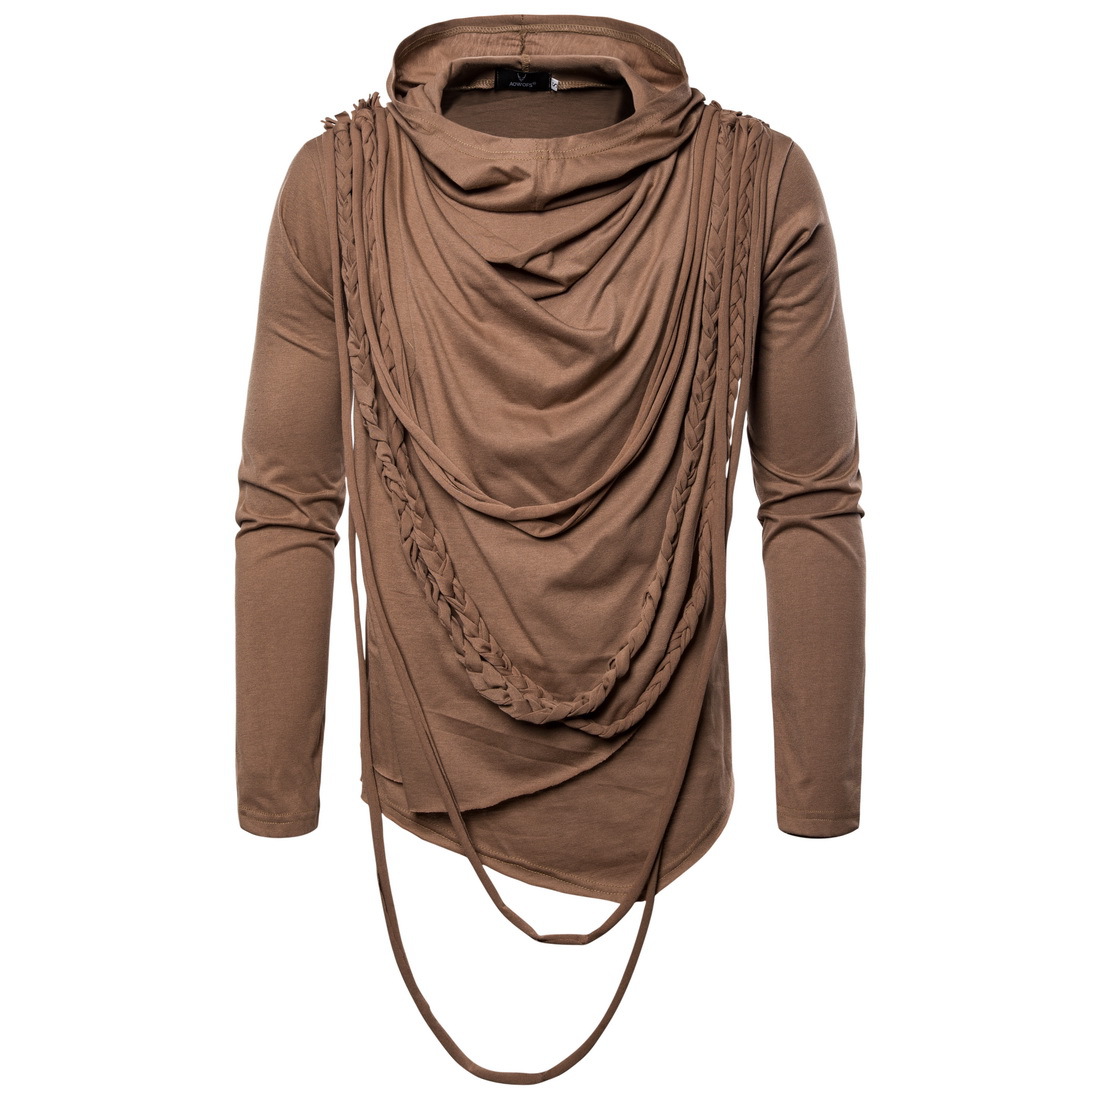  New Fashion Spring Autumn Winter Clothing Trend Long-sleeved Pullovers Men T Shirt Tops khkai